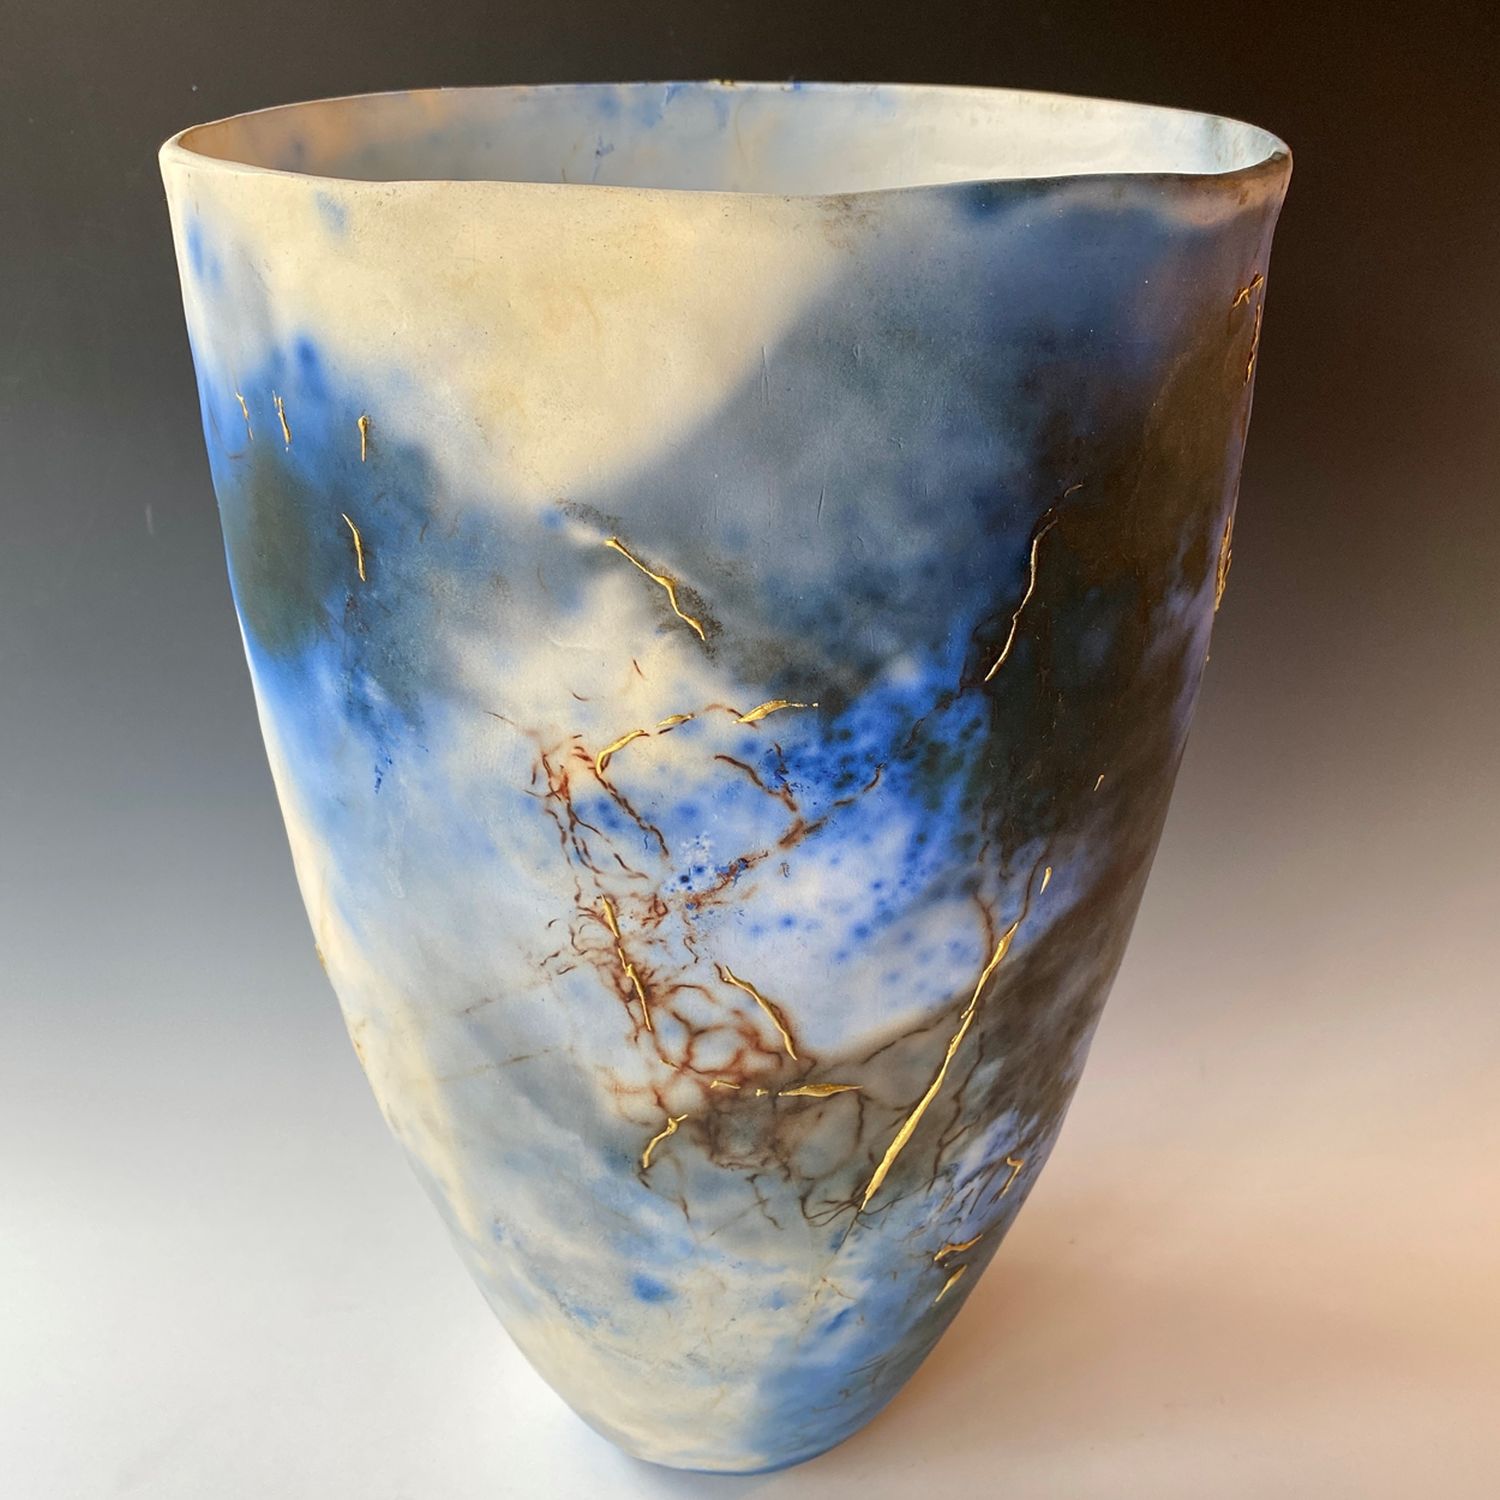 Alison Brannen: Tall Vessel Product Image 1 of 1